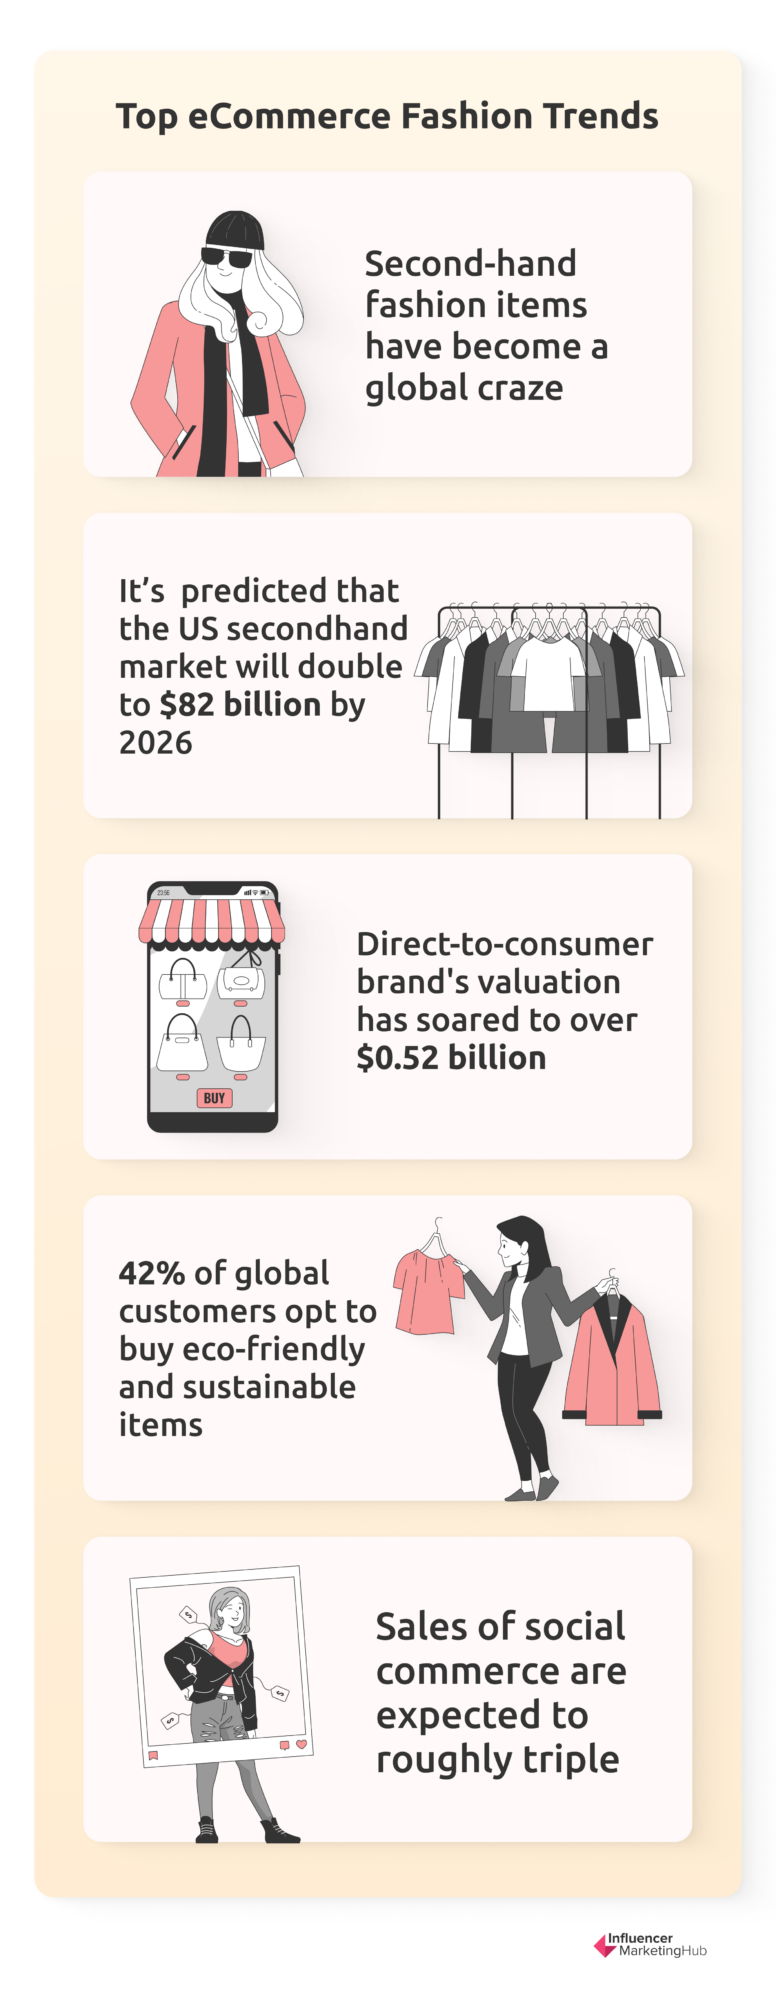 Top Fashion eCommerce Stats, Facts & Trends